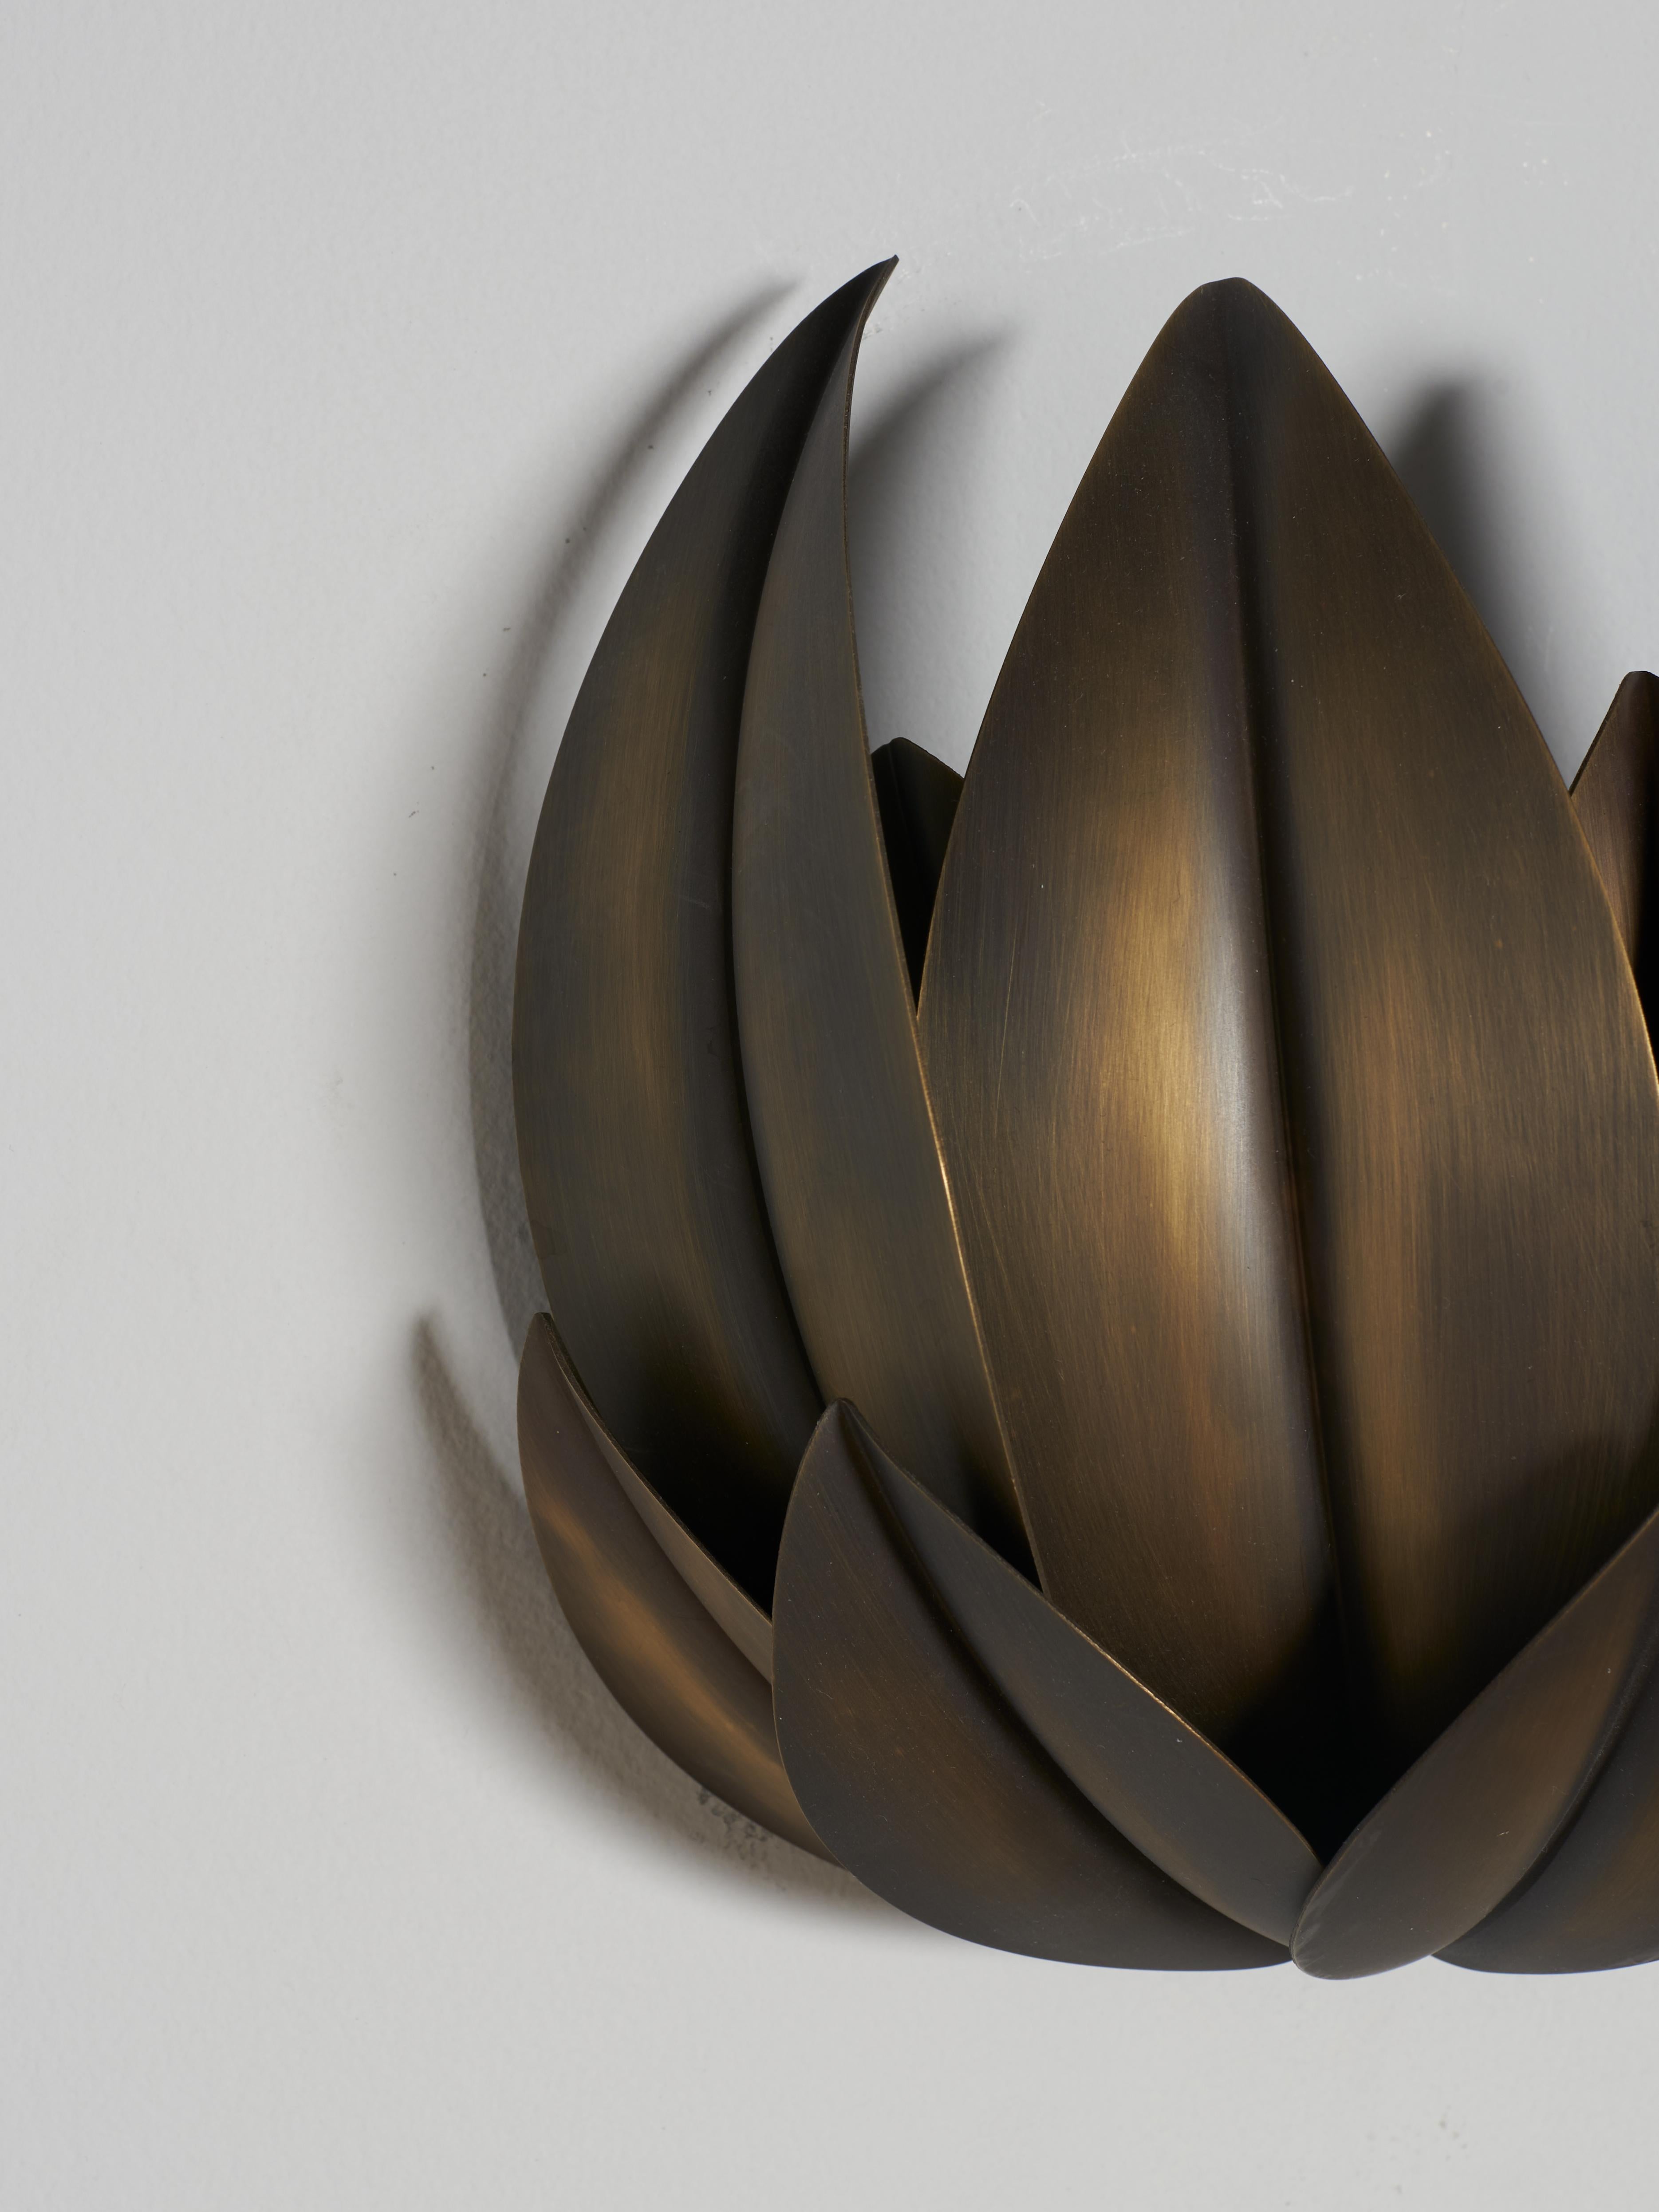 The Leaves wall sconce has been conceived and developed in collaboration with the architecture firm Droulers Architecture.
This decorative wall sconce is a stunning example of how inspiration drawn from nature can be translated into a beautiful and